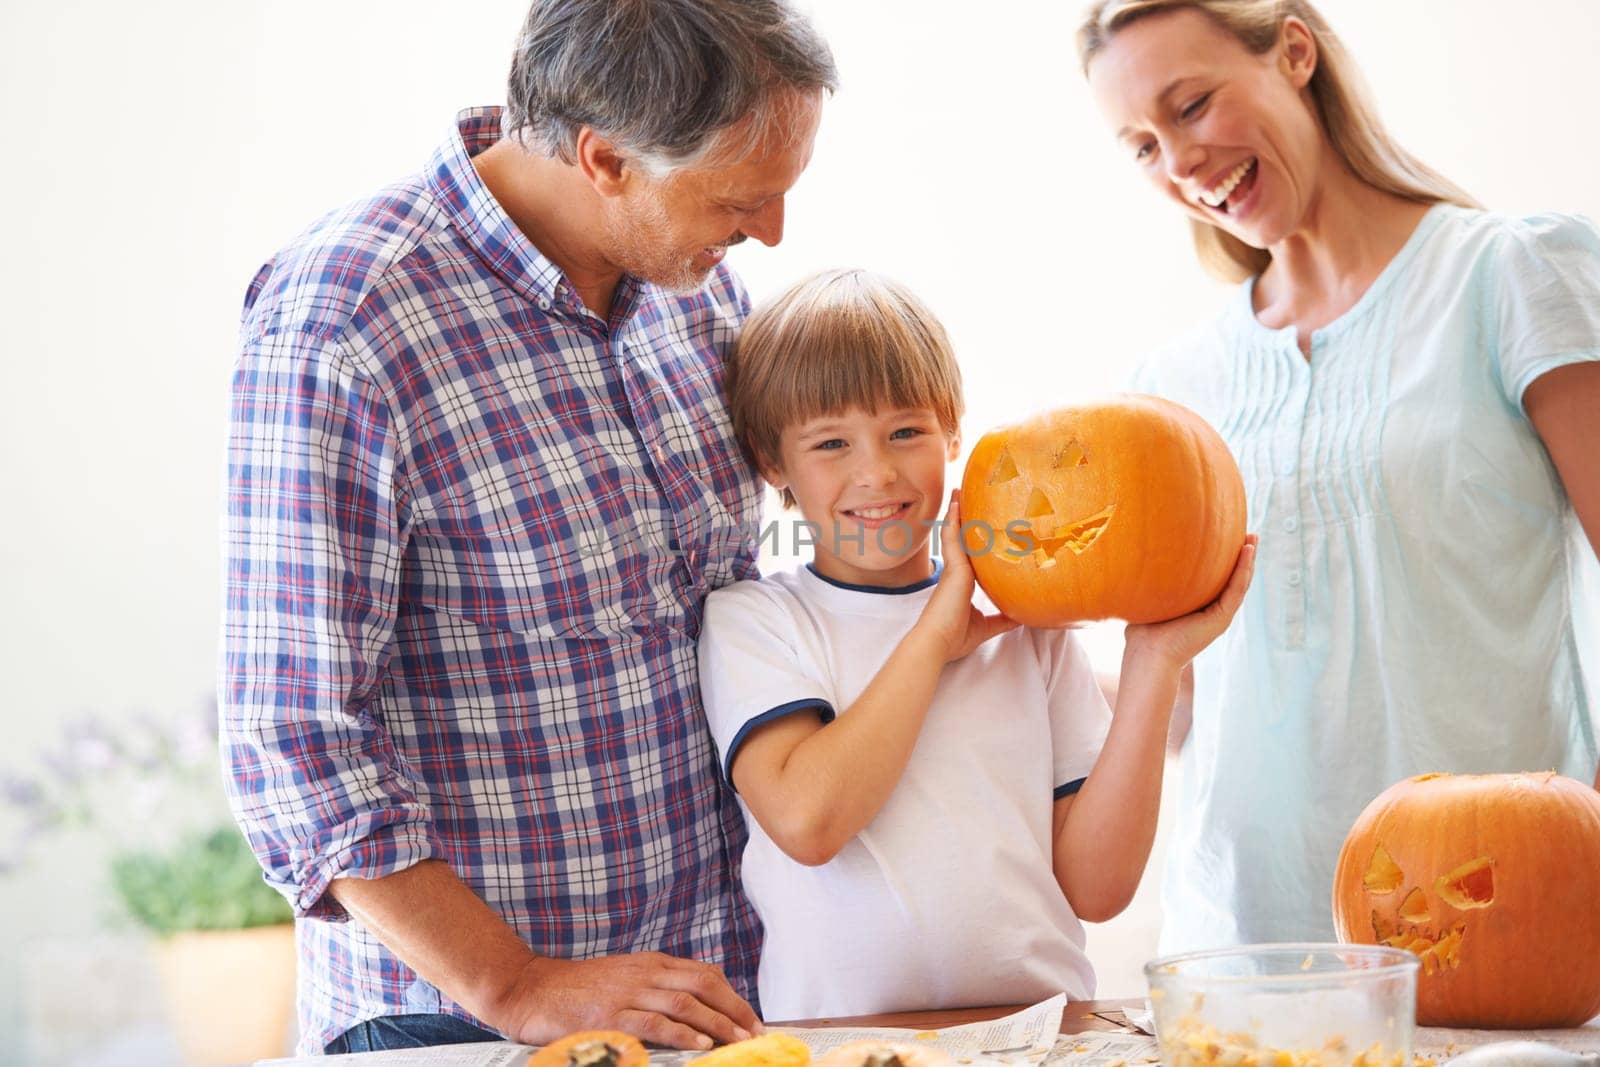 Halloween, family and carving a pumpkin with a child in a home for fun and bonding. Man and woman or parents and young kid for portrait together for creativity, holiday lantern and happy craft.